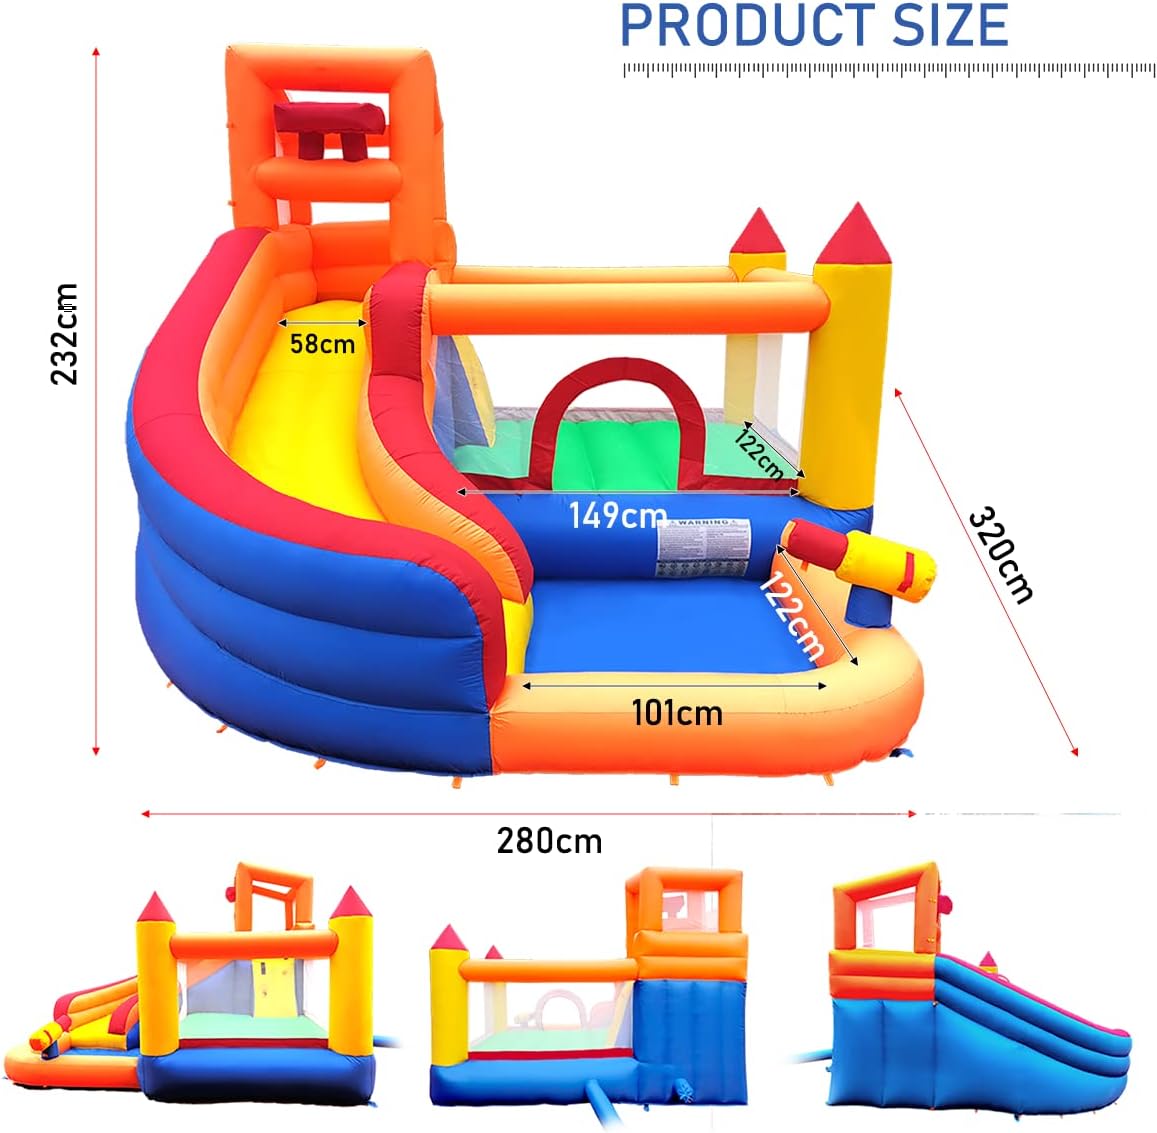 Ballsea Bouncy Castle, Inflatable Trampoline Bounce House with Long Slide, Climbing Wall, Ball Pit, Cannon, Bucket Dump for Kids Indoor Outdoor